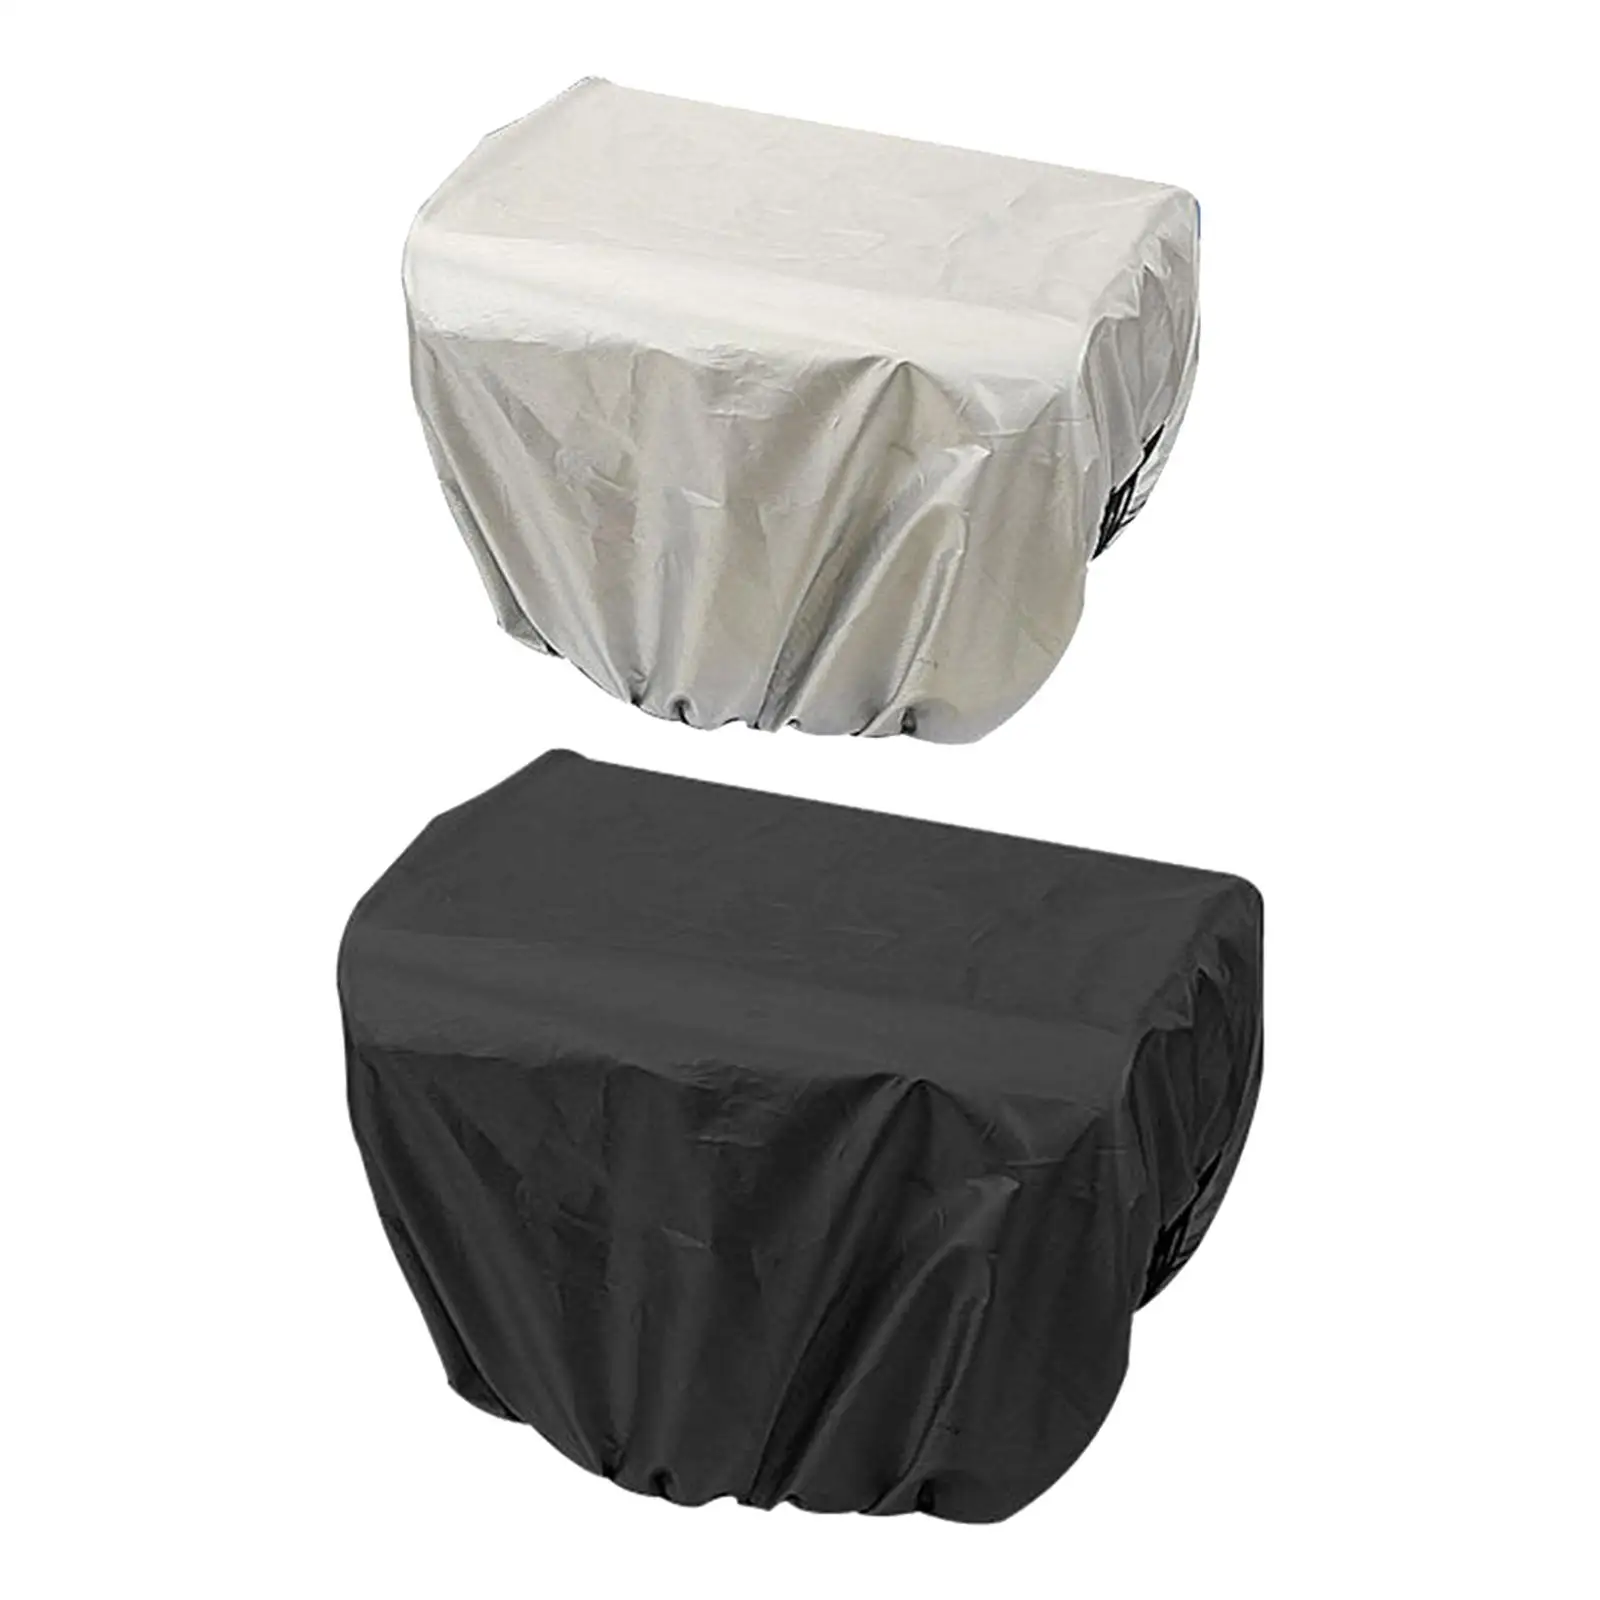 Bike Basket Cover Dustproof for Most Baskets Tricycles Motorcycles